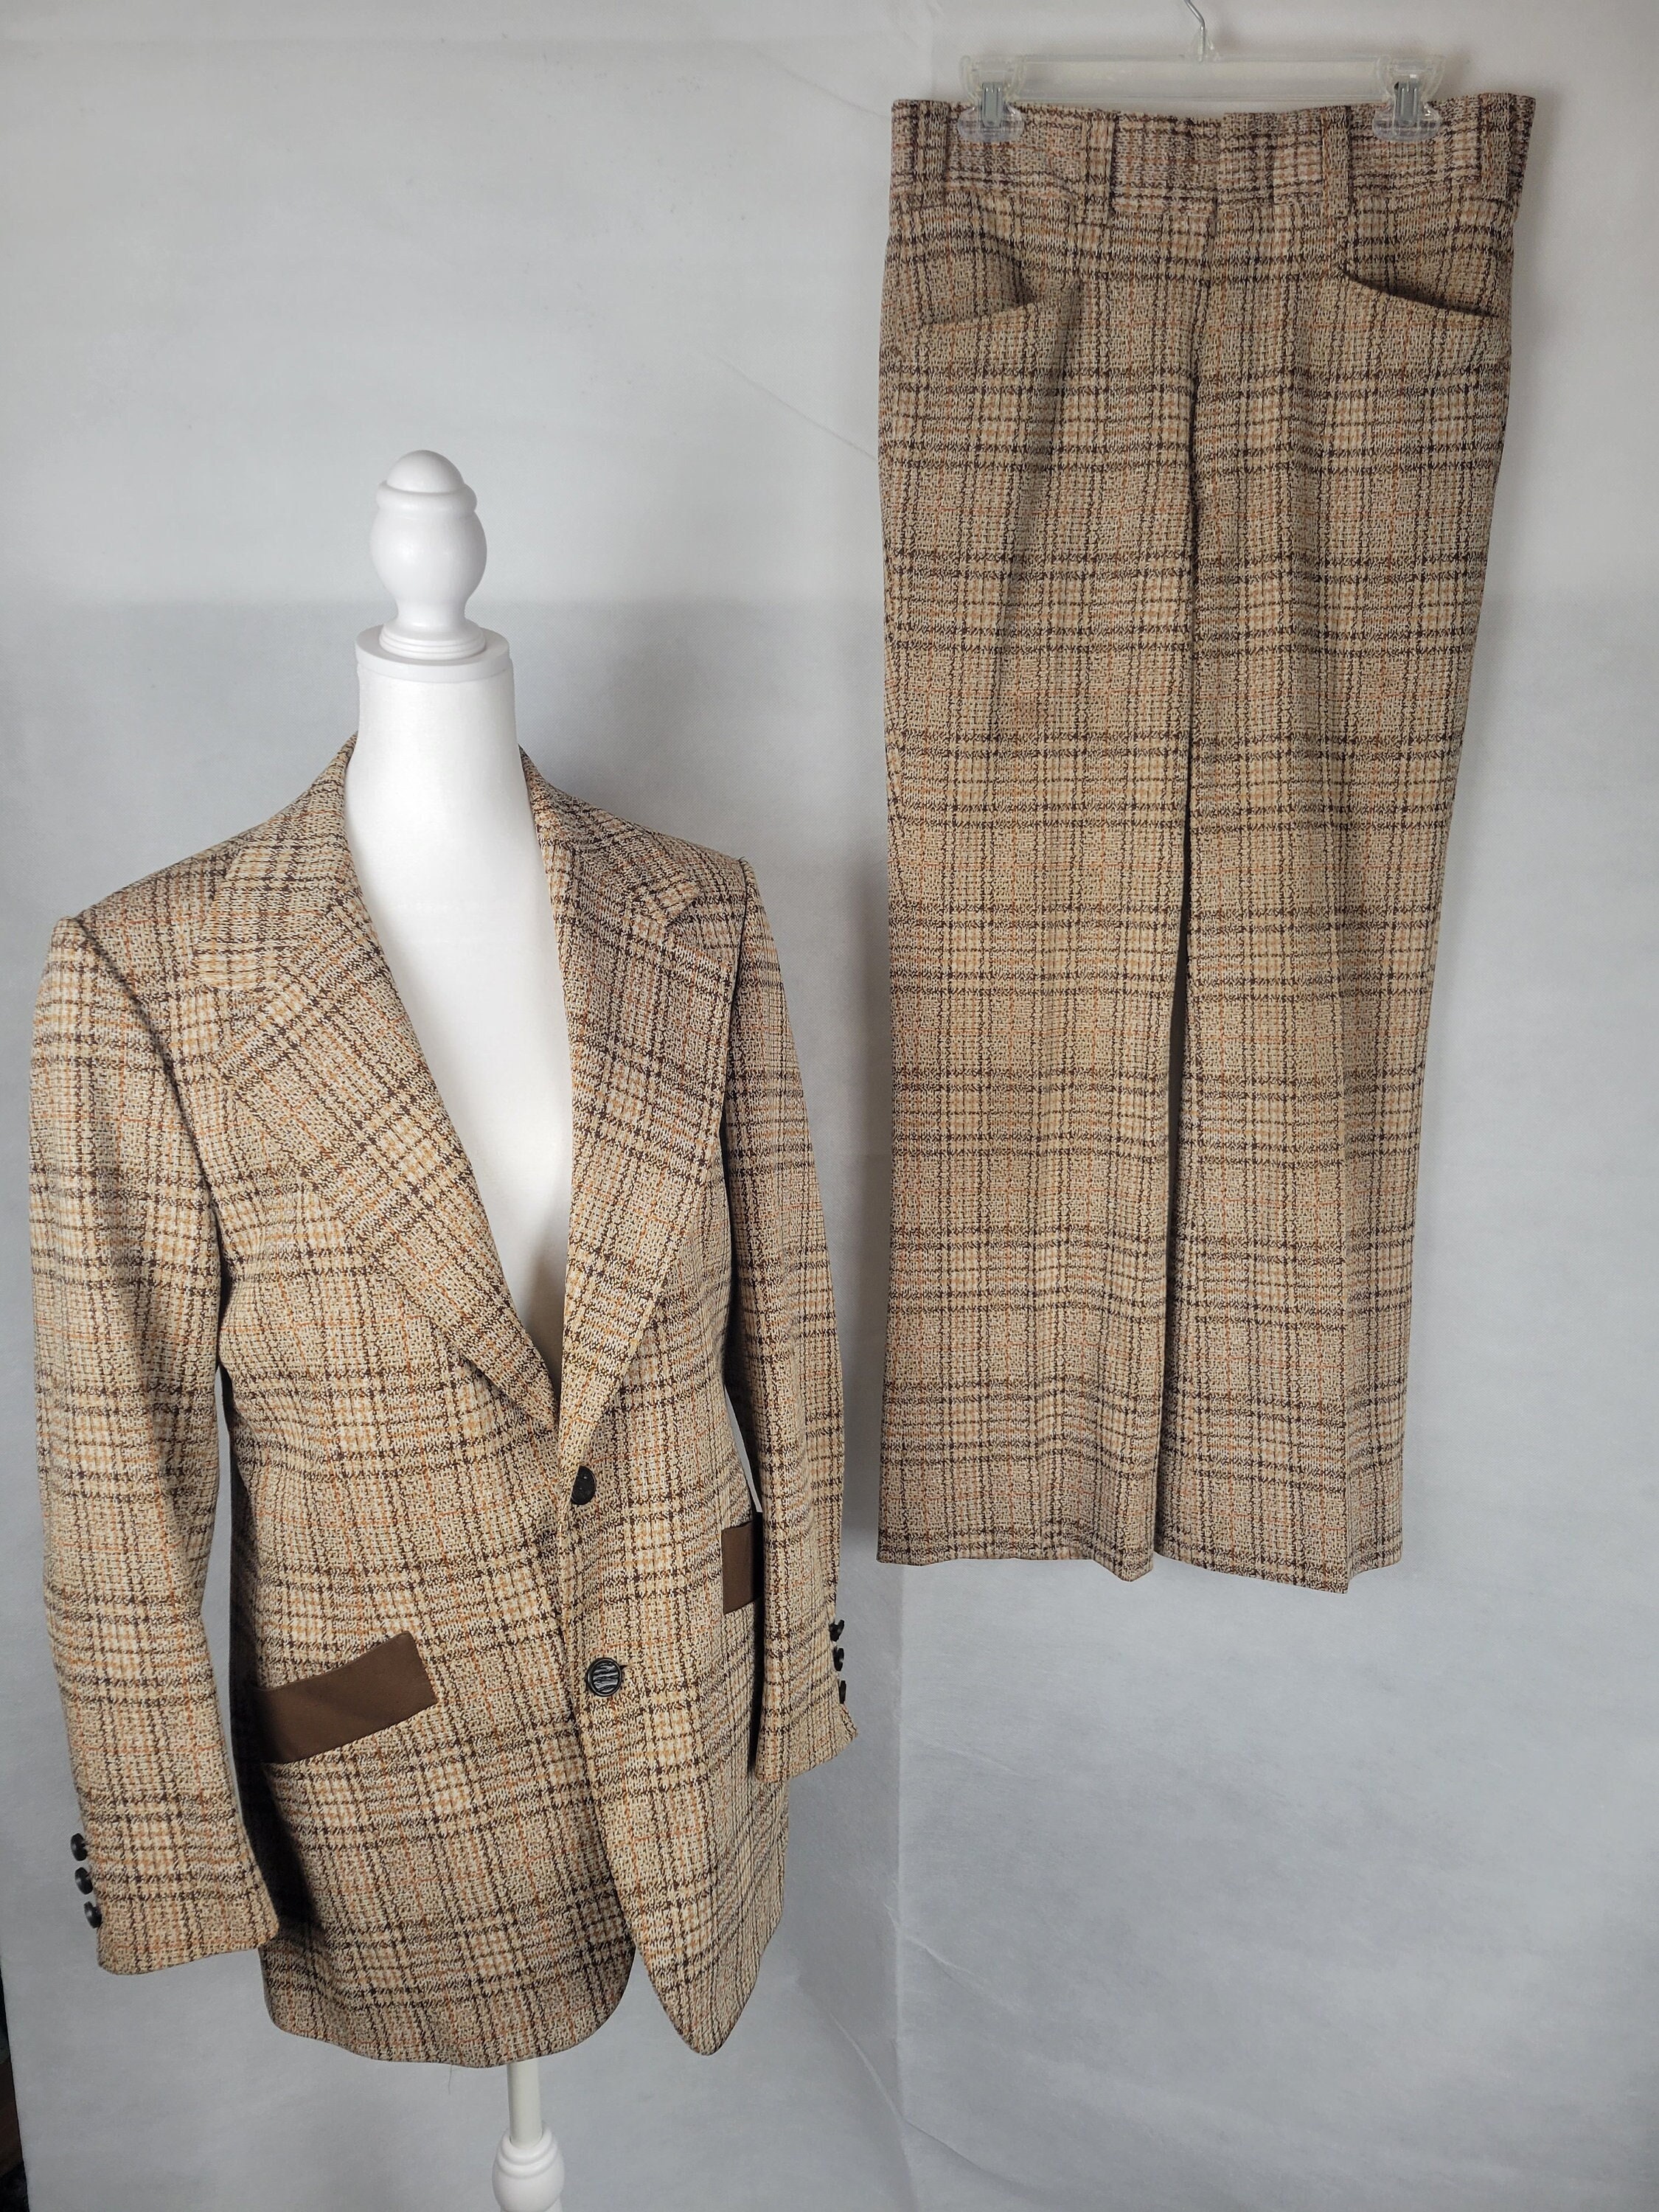 Hipsters Old suit  Hipster mens fashion, 1920s mens fashion